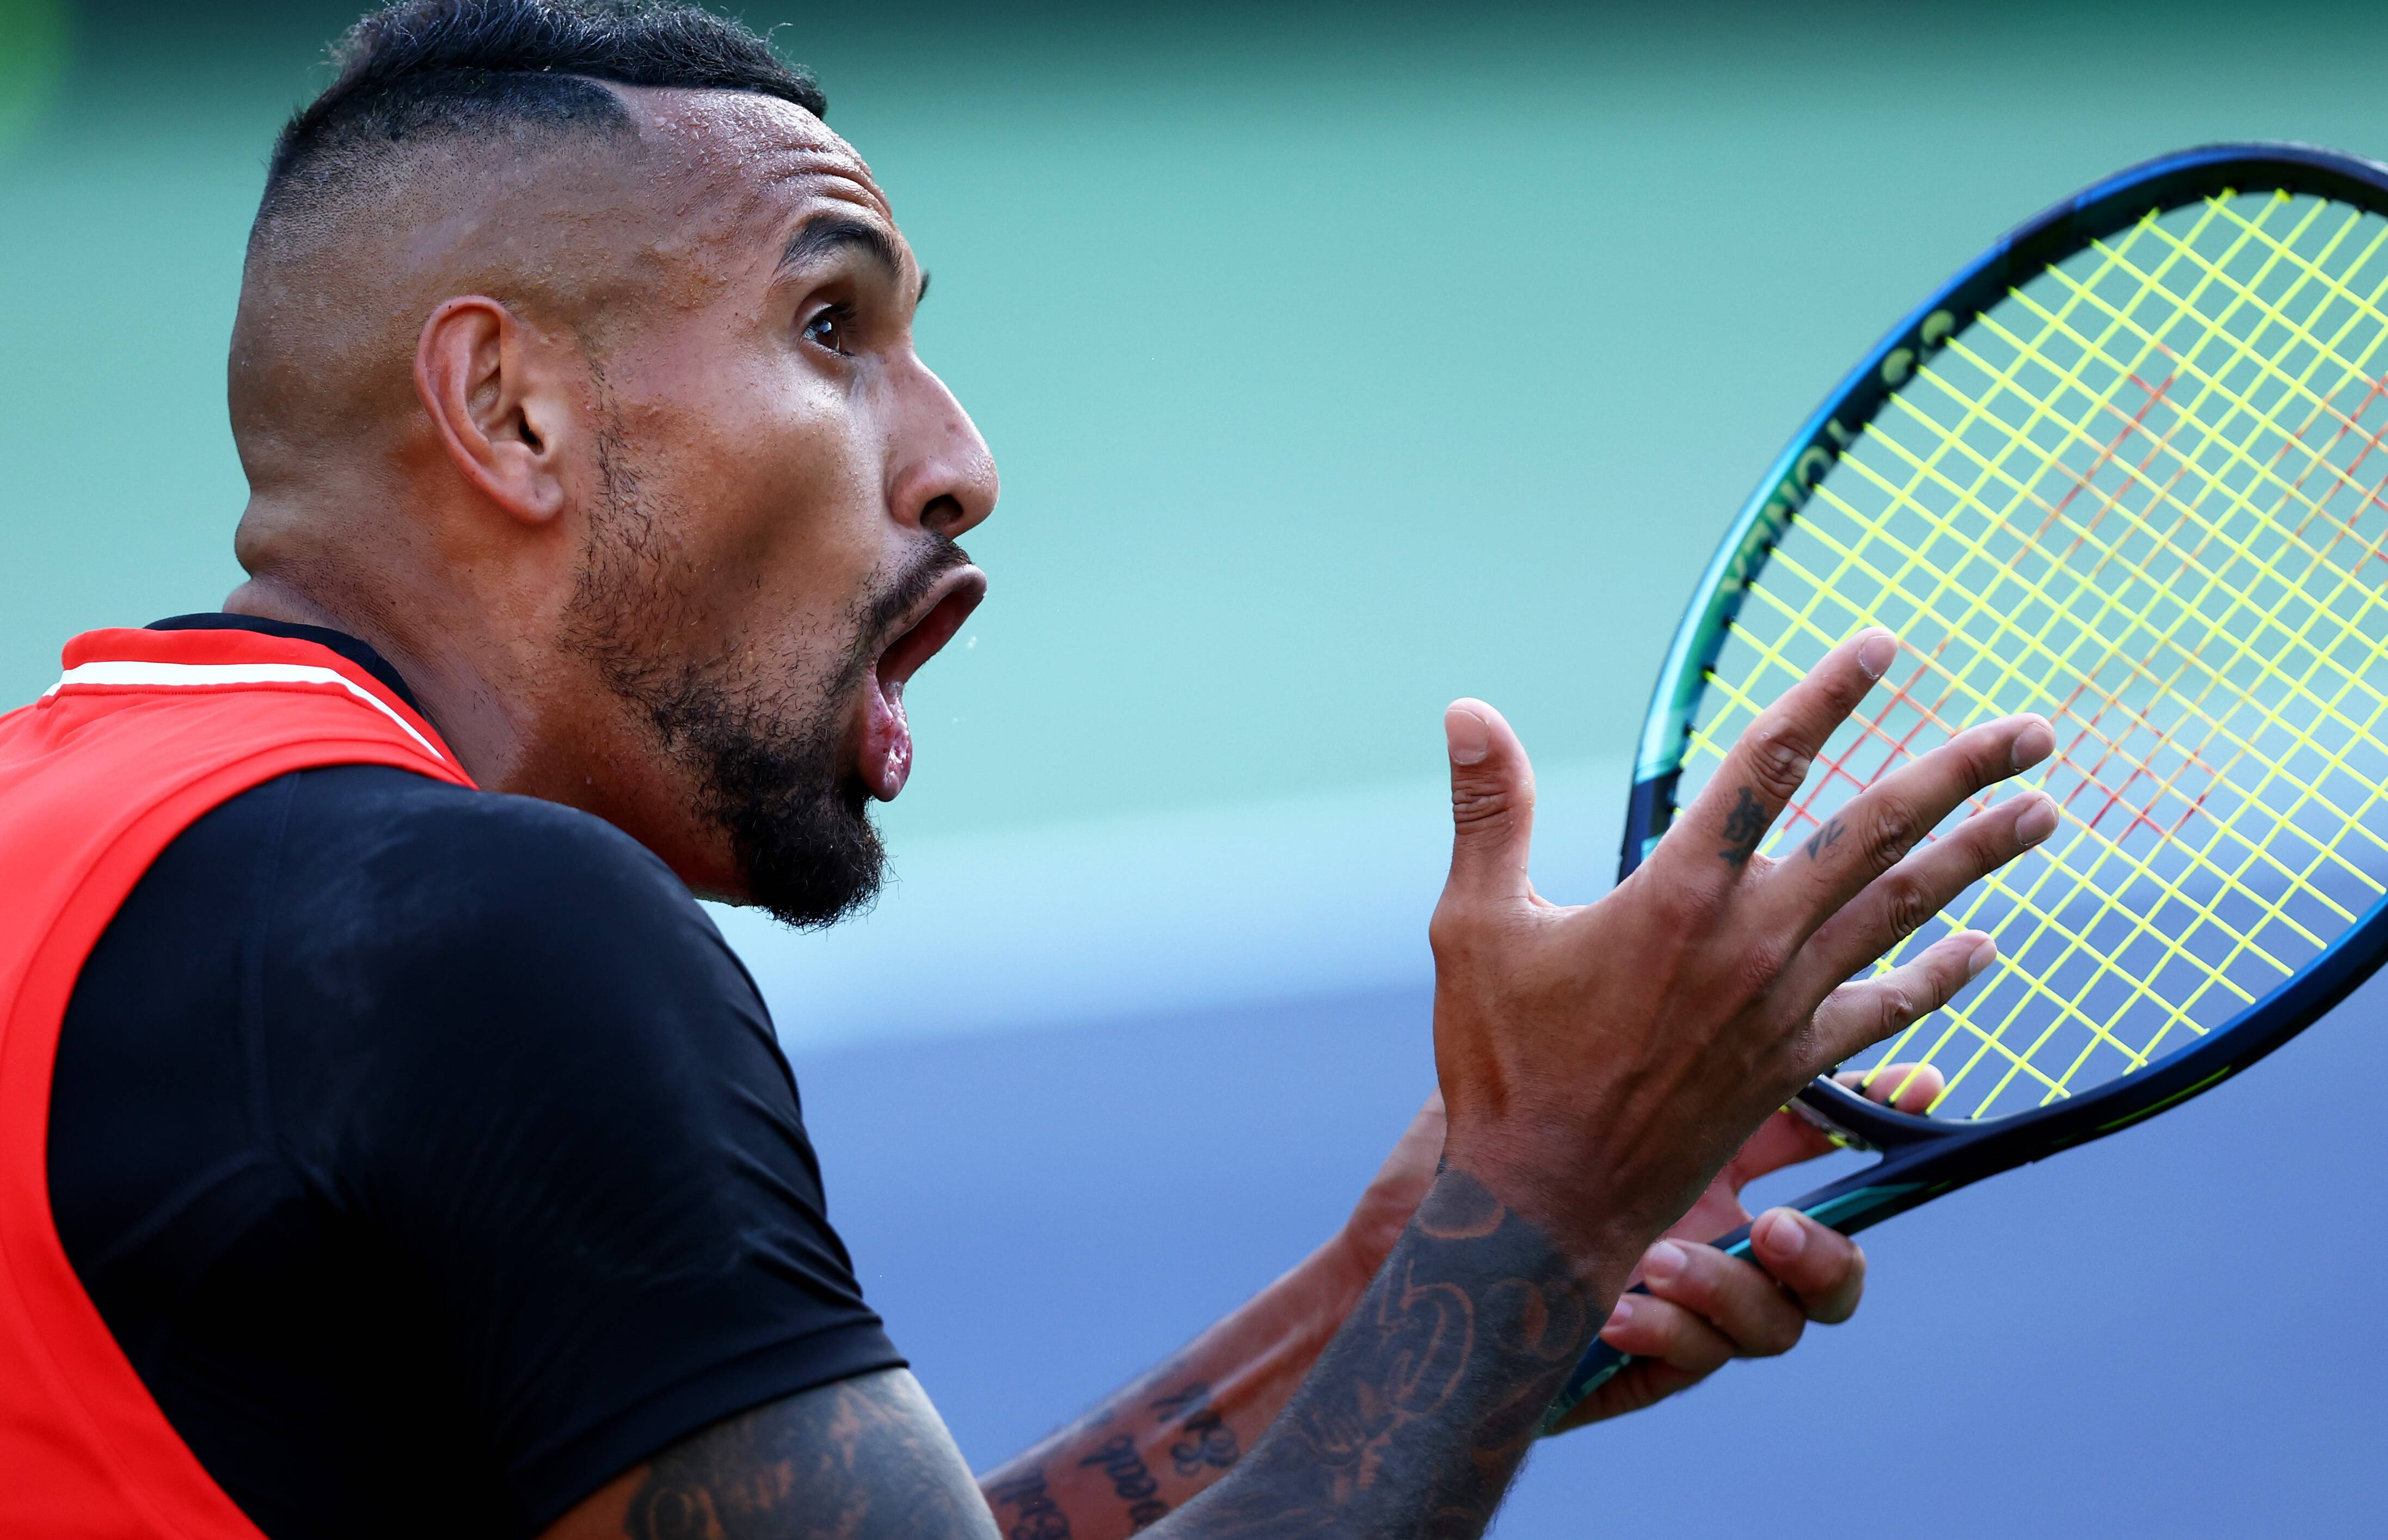 Best and worst of Nick Kyrgios as he jokes with Ben Stiller in Rafael Nadal clash at Indian Wells The Canberra Times Canberra, ACT